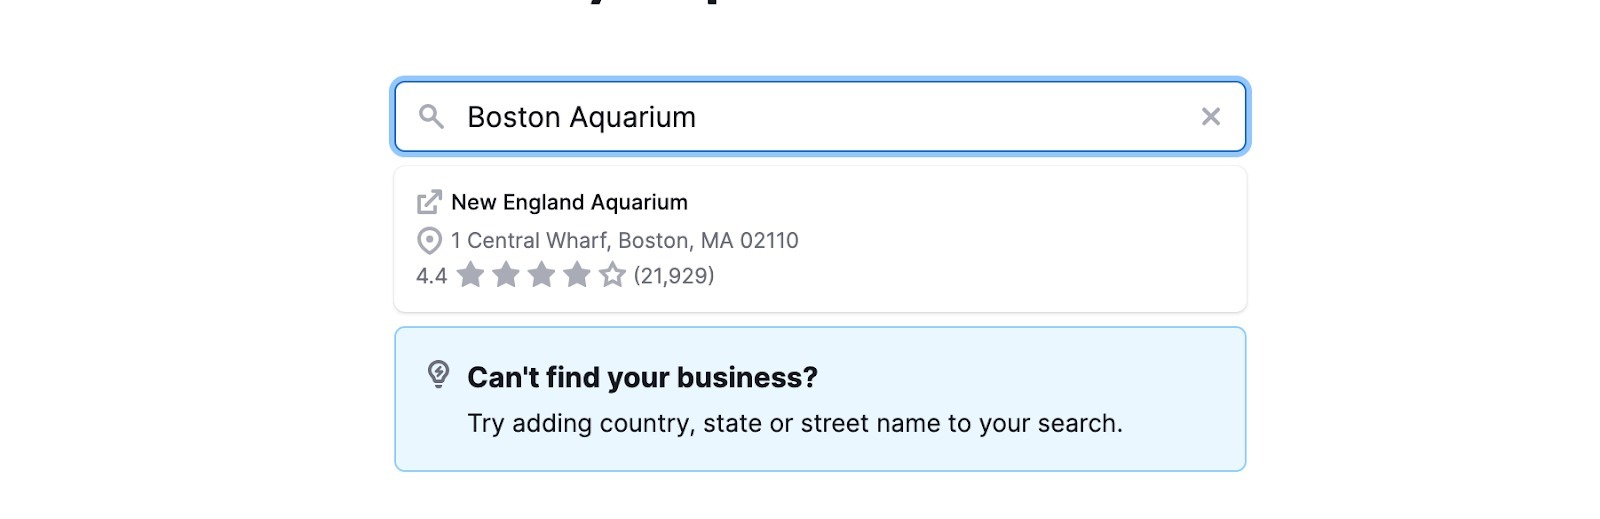 To get started, users enter the name of the business they want to track into the tool’s search bar.